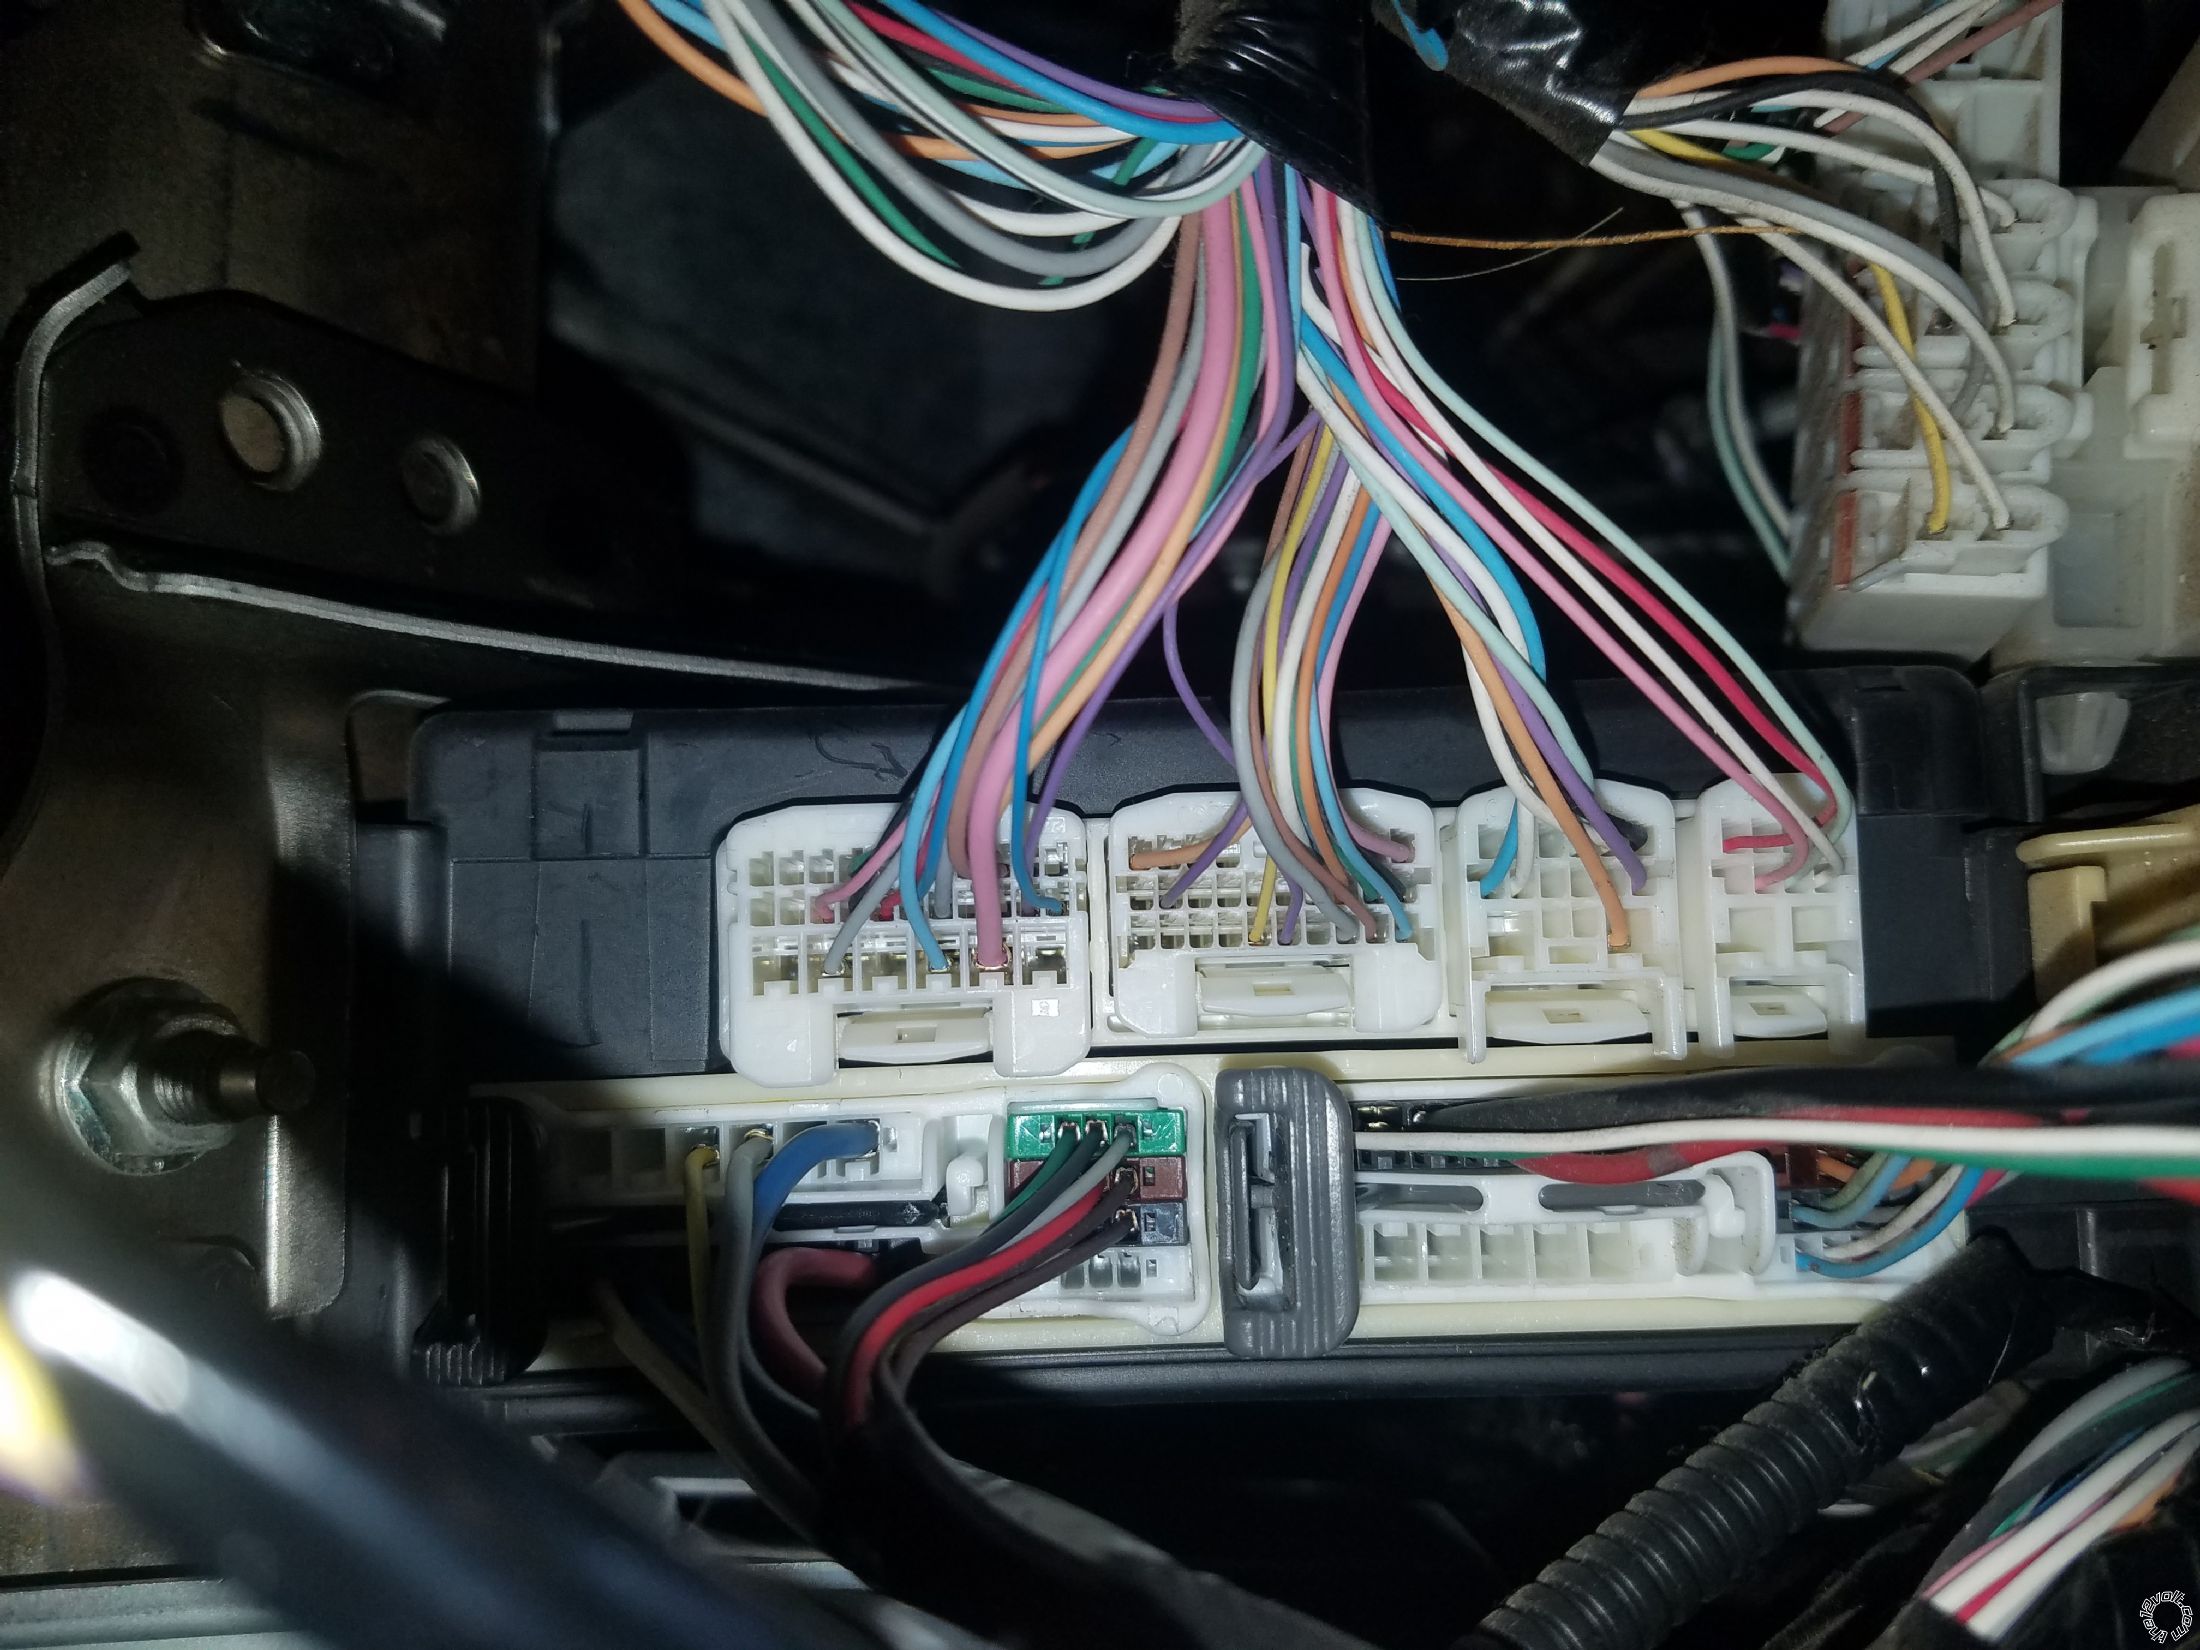 07 Toyota Tundra, Dash Fuse Box Side Connections, 12V Constant - Last Post -- posted image.